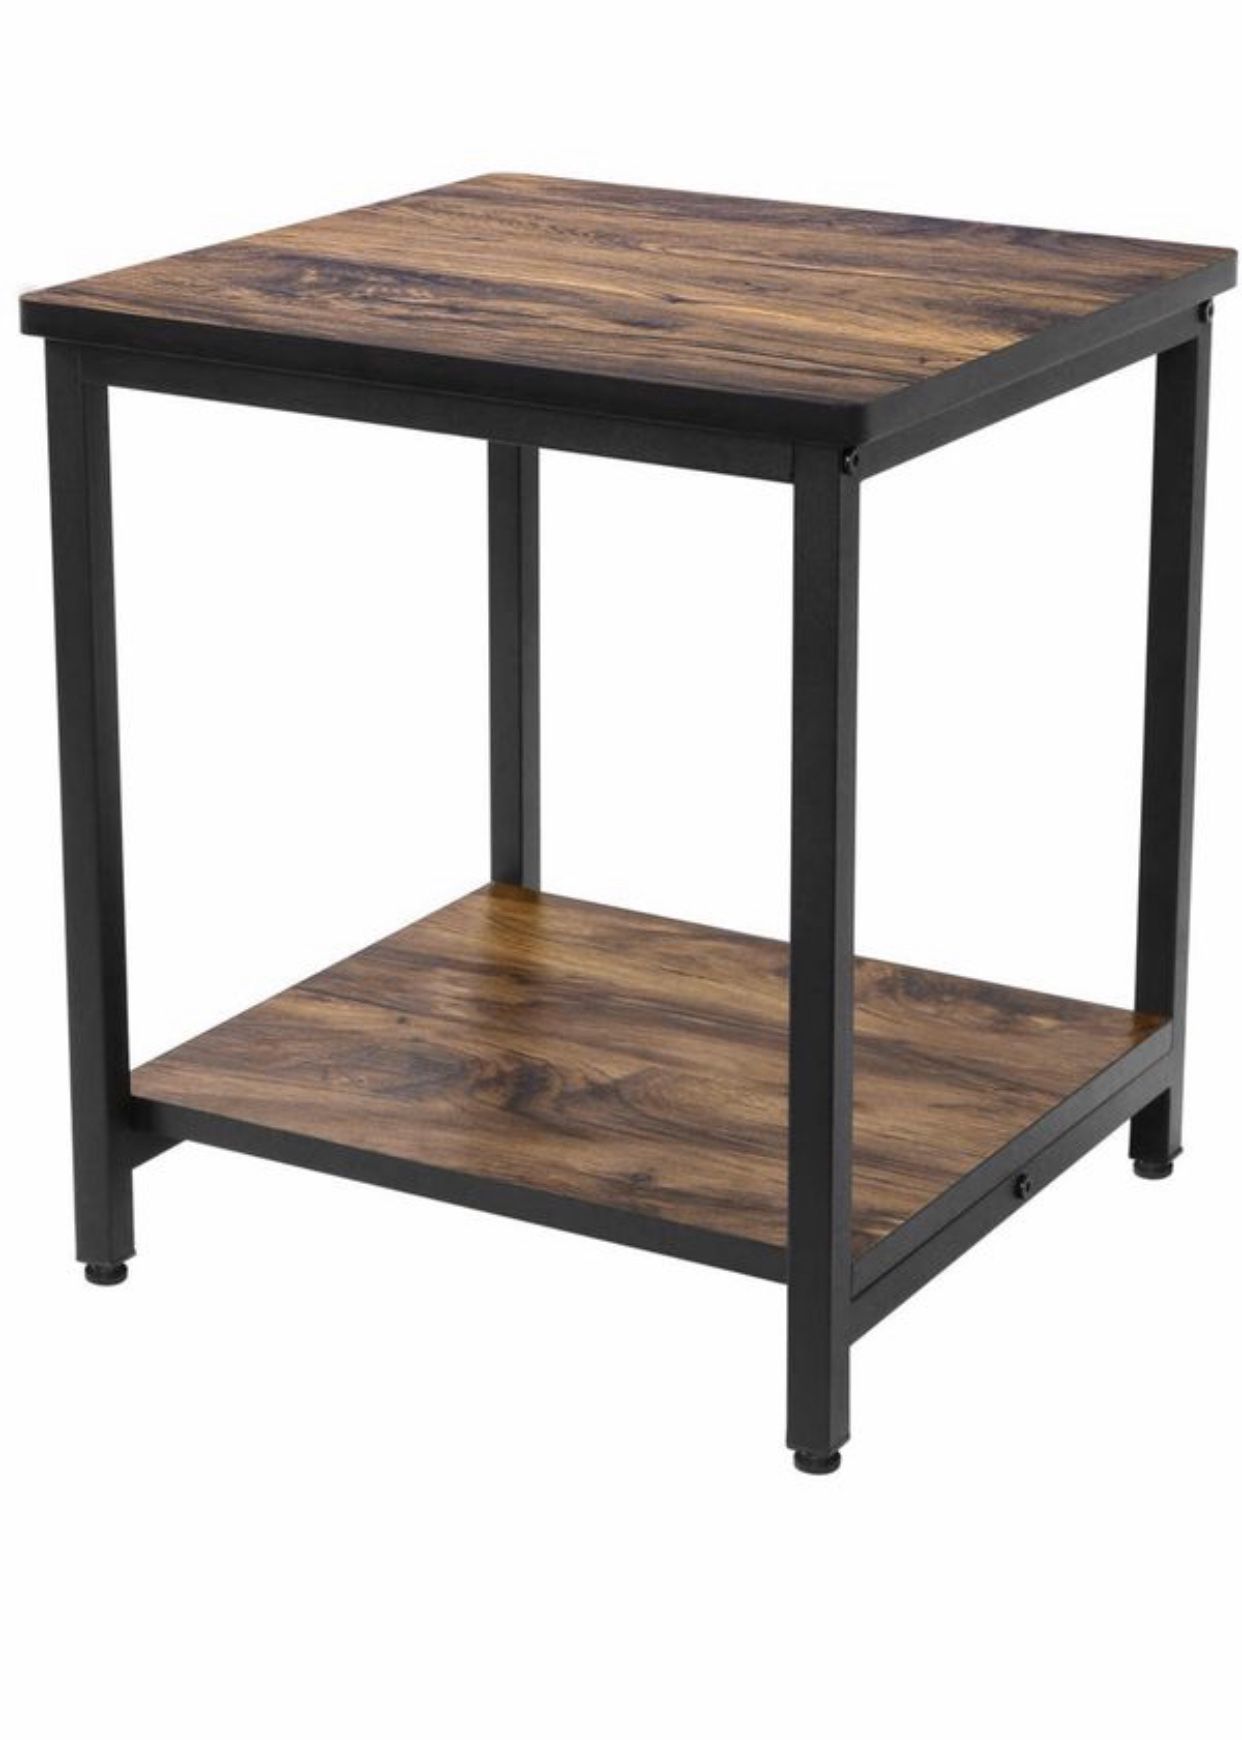 Brand New, bought off amazon, not what I expected, End Table, 2 Tier Side Table with Storage Shelf and Adjustable Table Leg, Rustic Night Stand for S